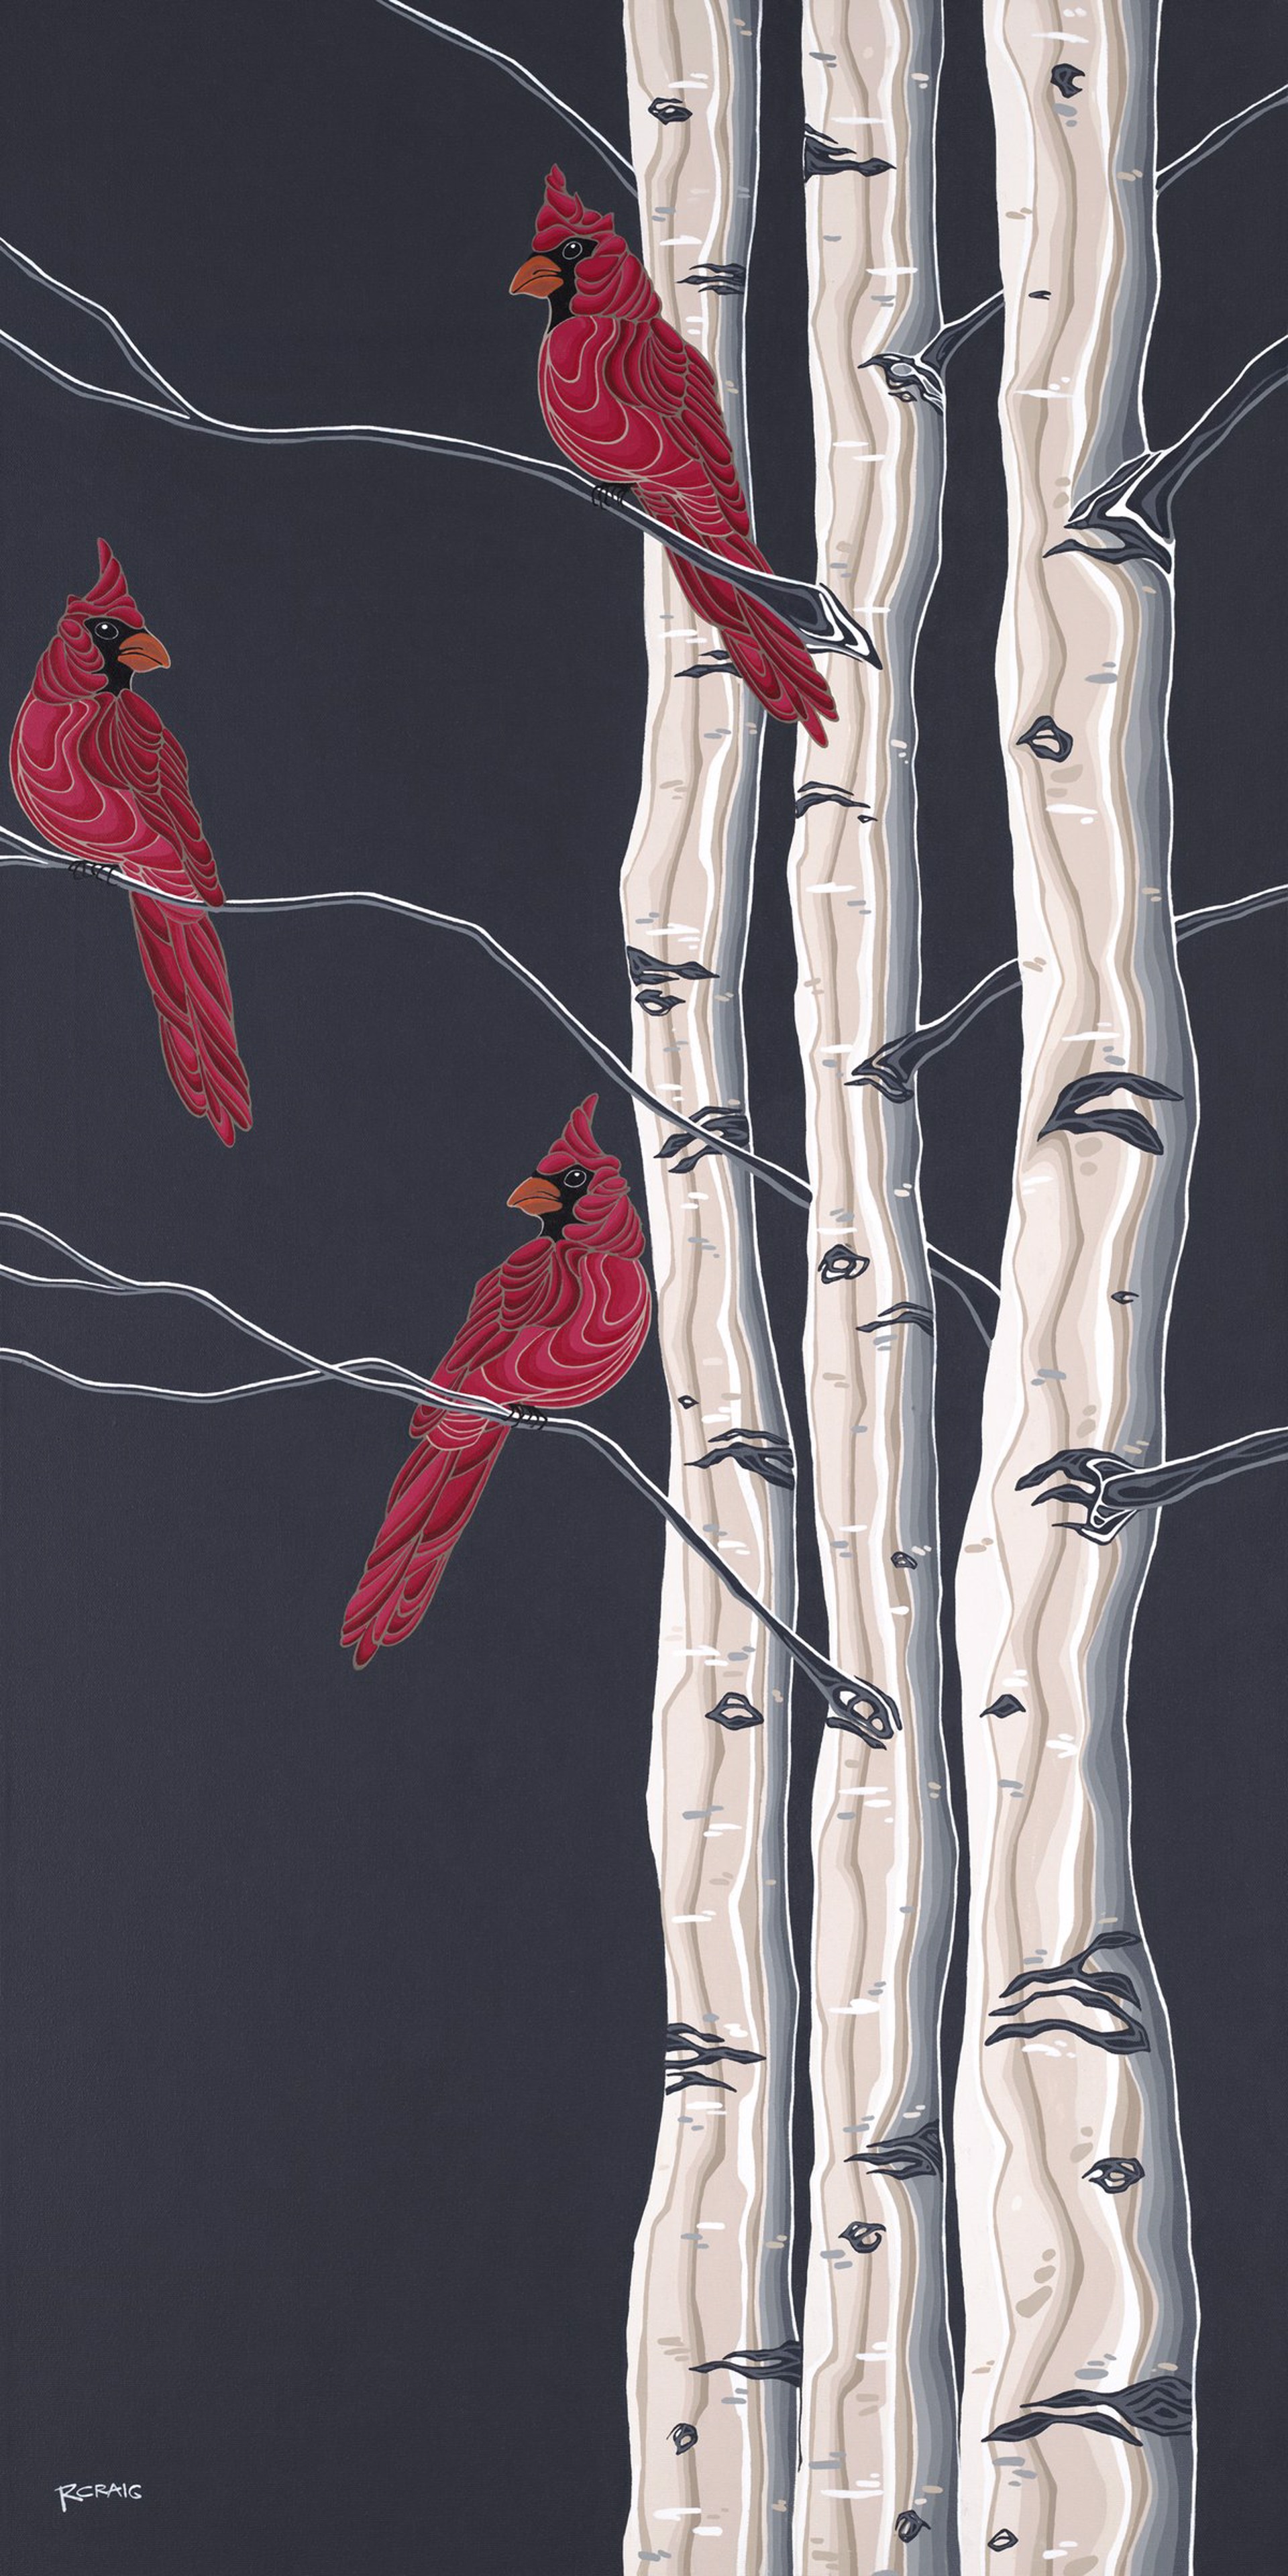 The Cardinals by Robbie Craig